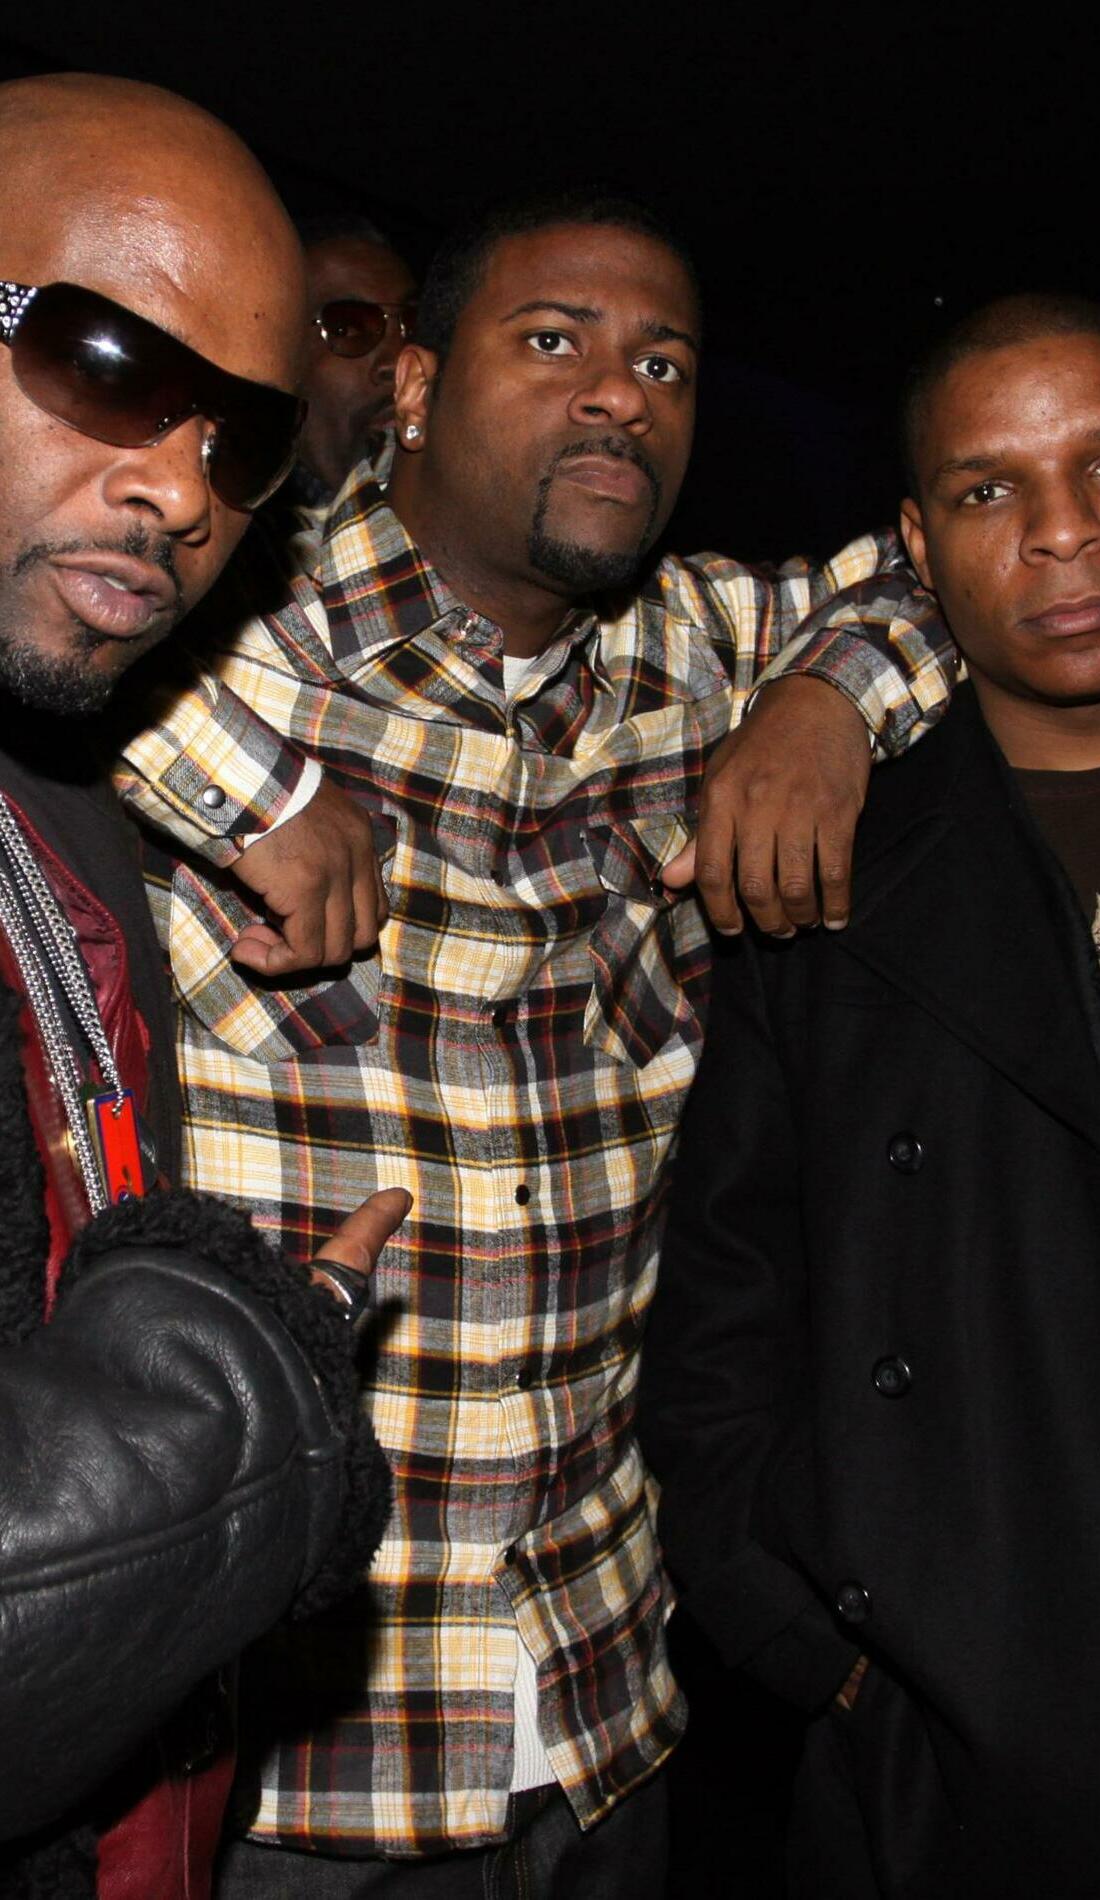 A Naughty by Nature live event